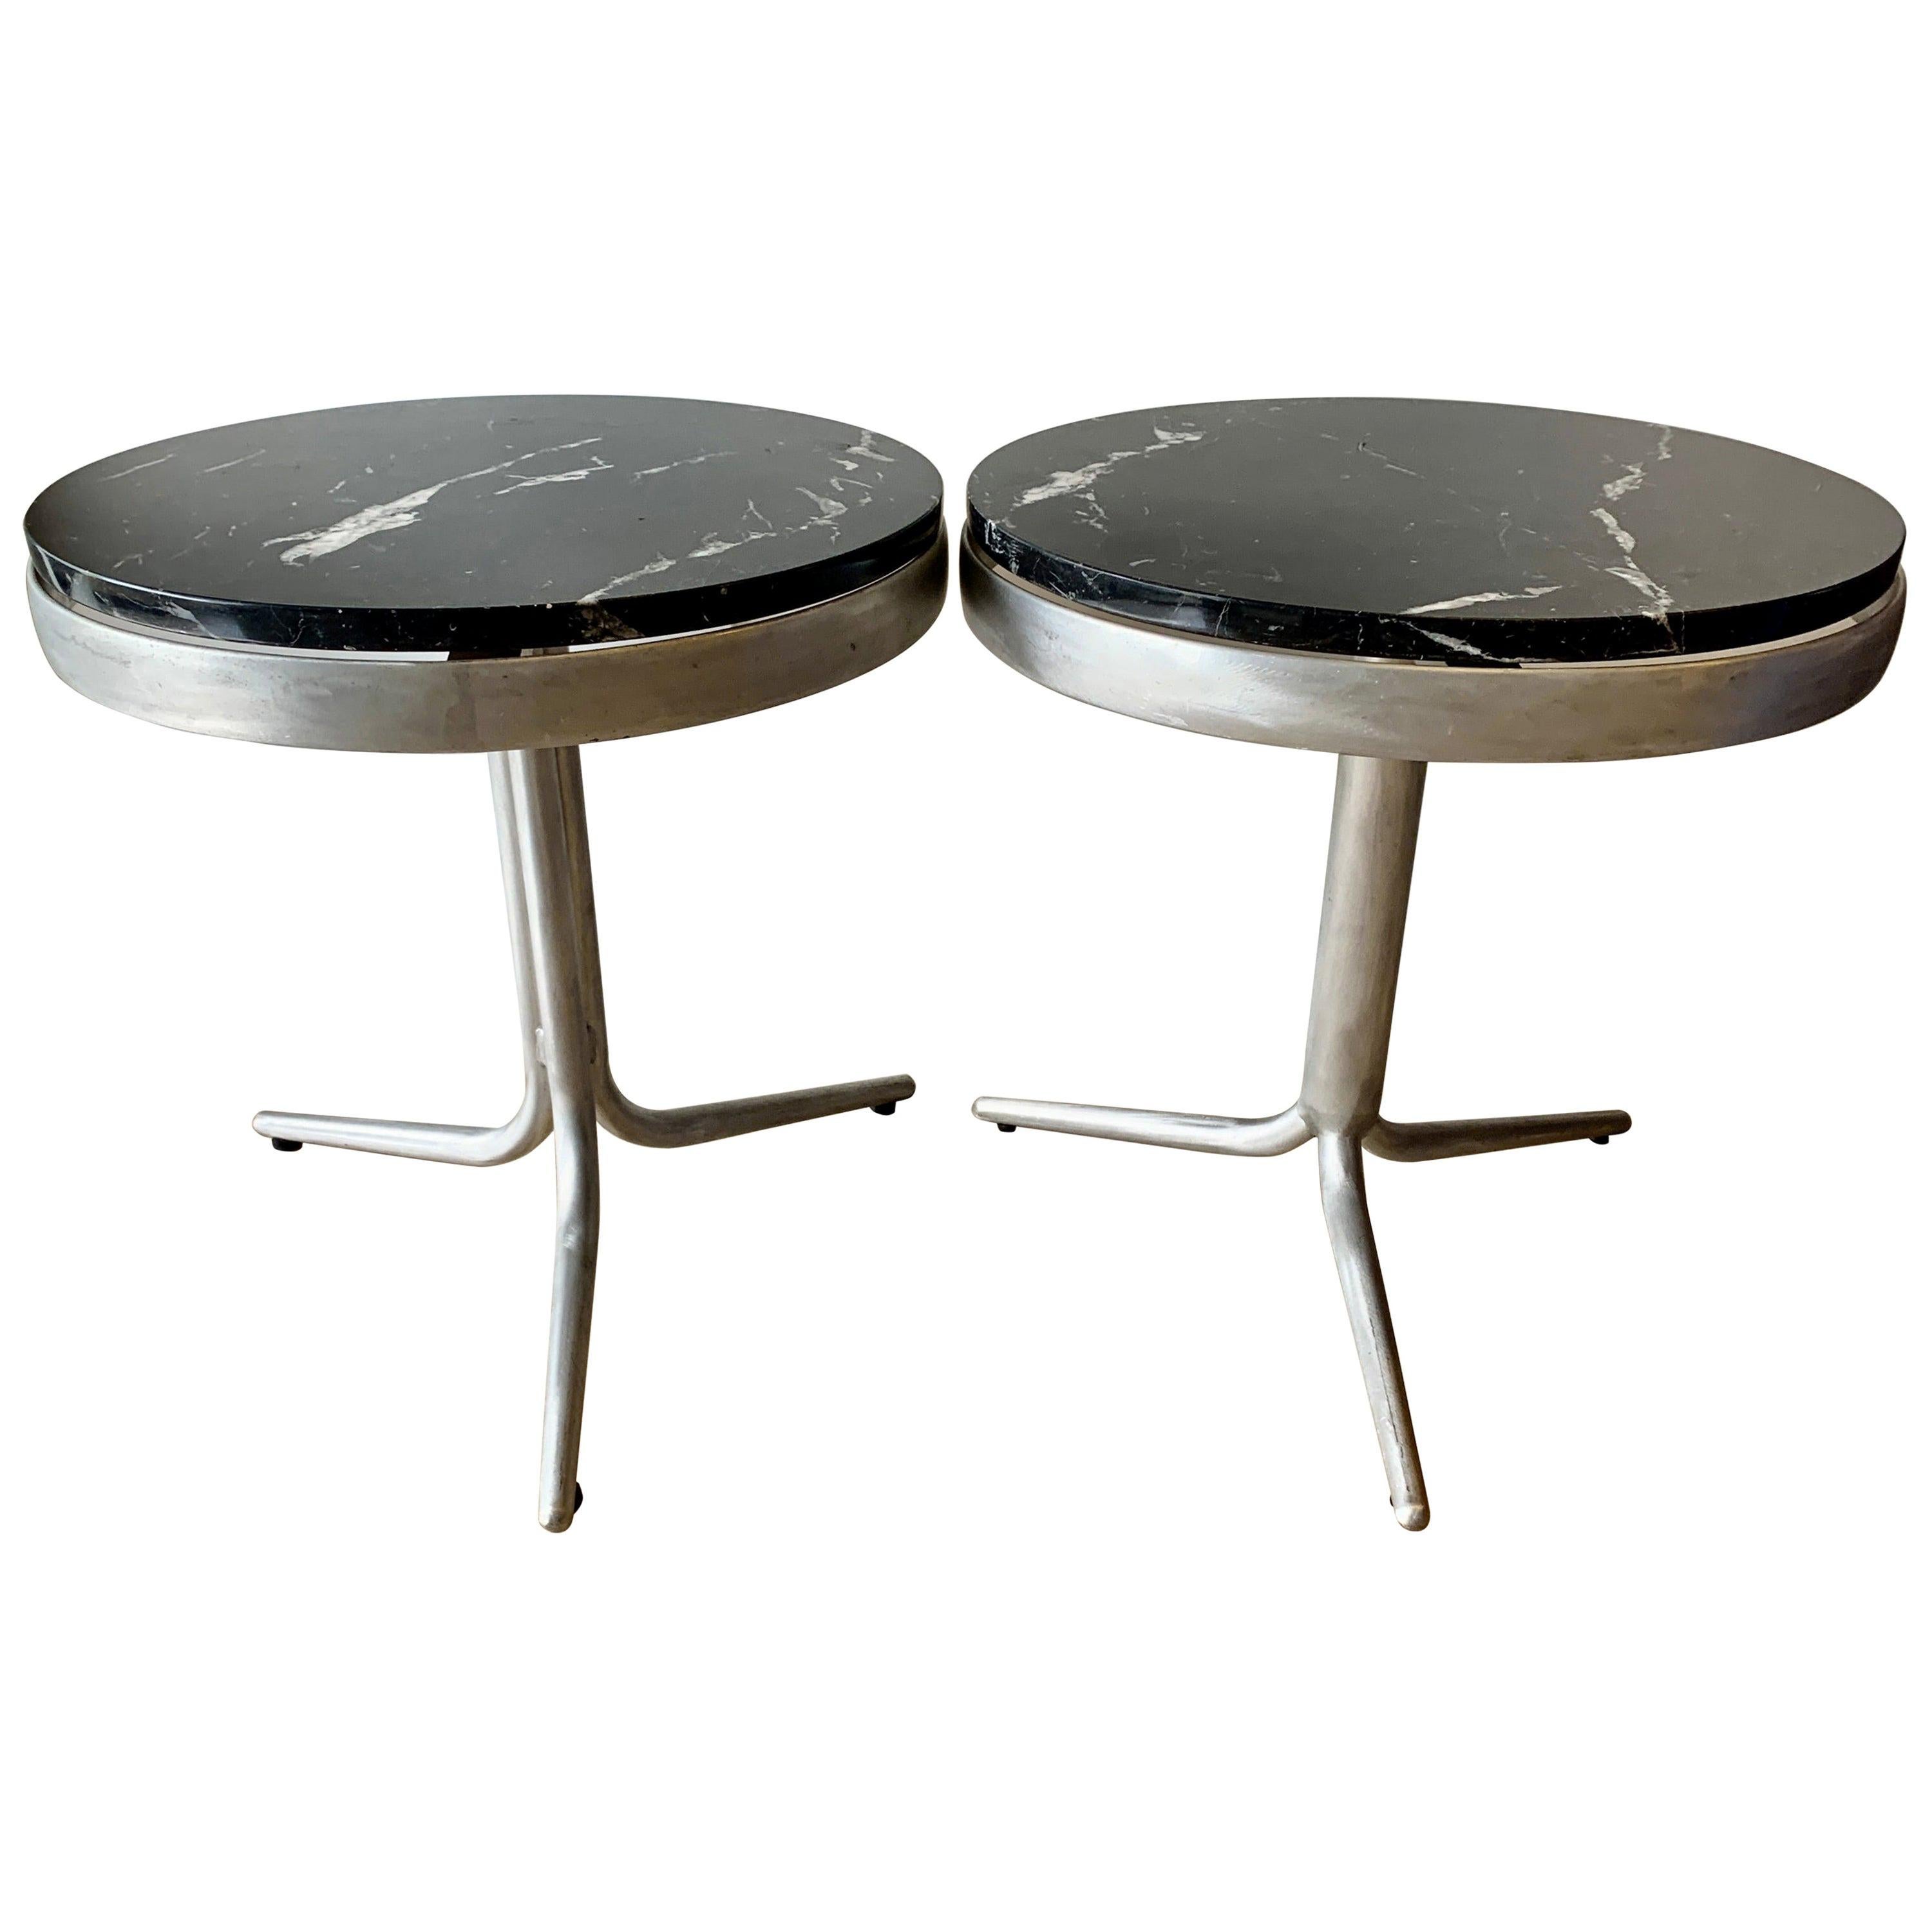 Pair of Italian Side Tables with Marble Tops